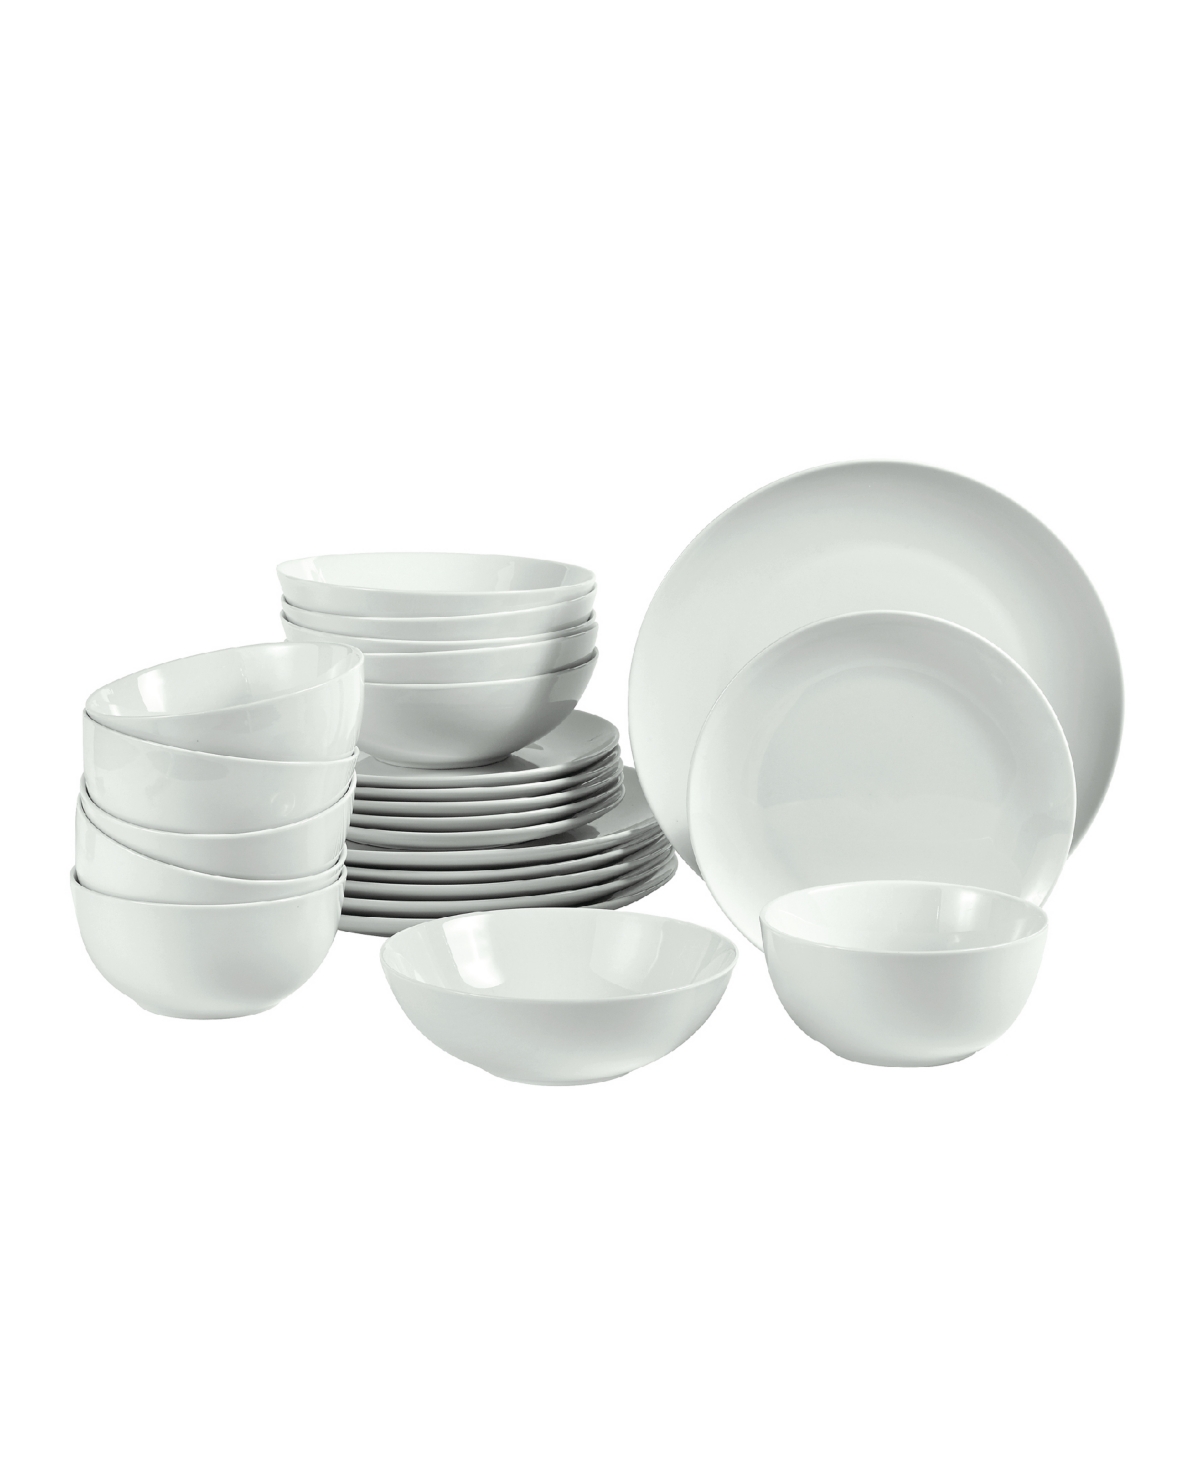 Simply White Coupe Dinnerware 24-pc Set, Service for 6 - White